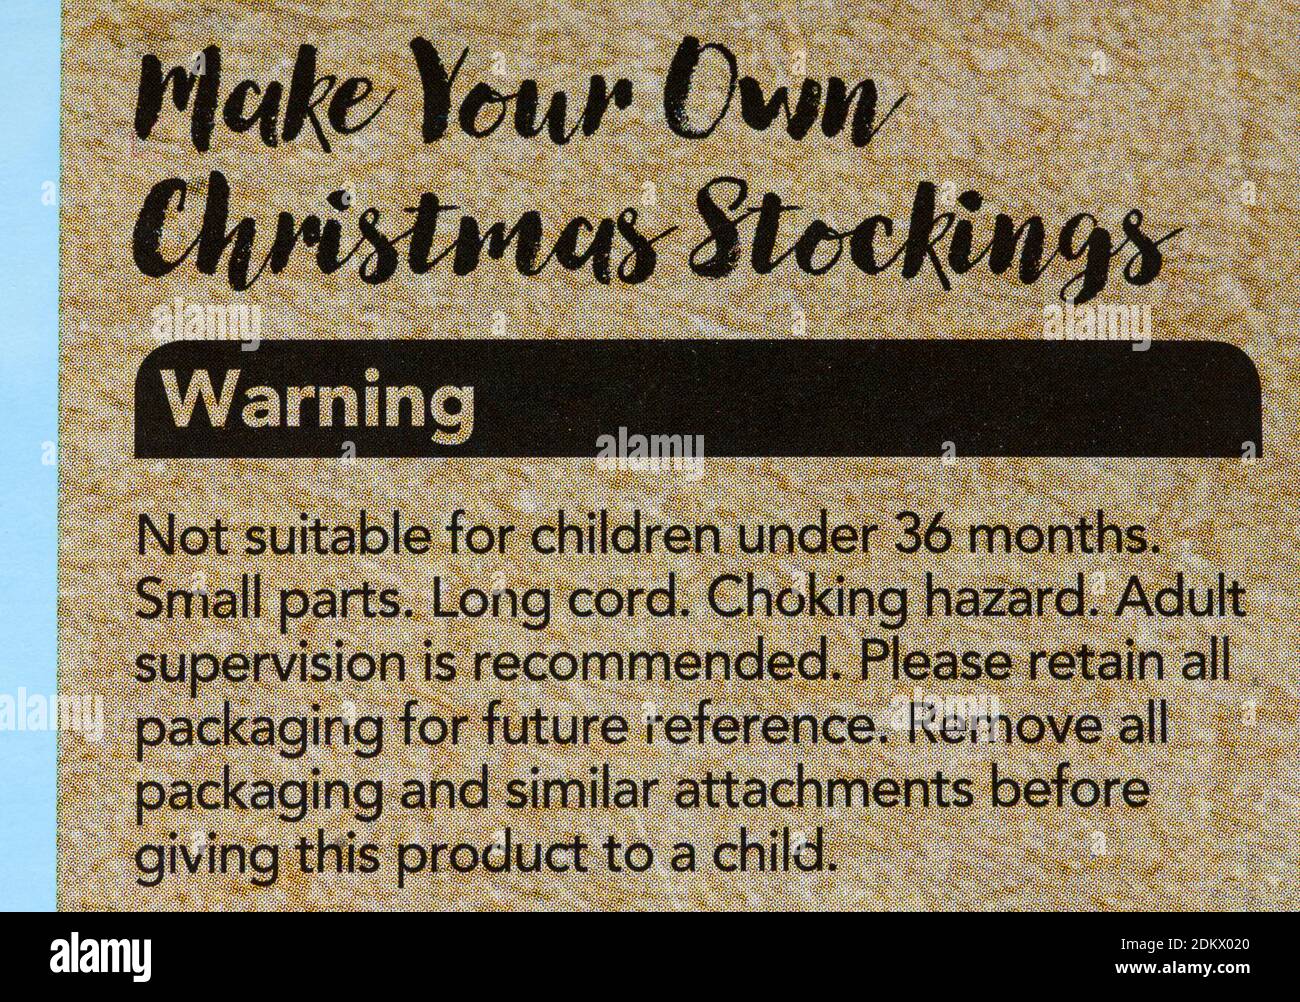 Warning message on packaging of Wilko Make your own Christmas Stockings Stock Photo